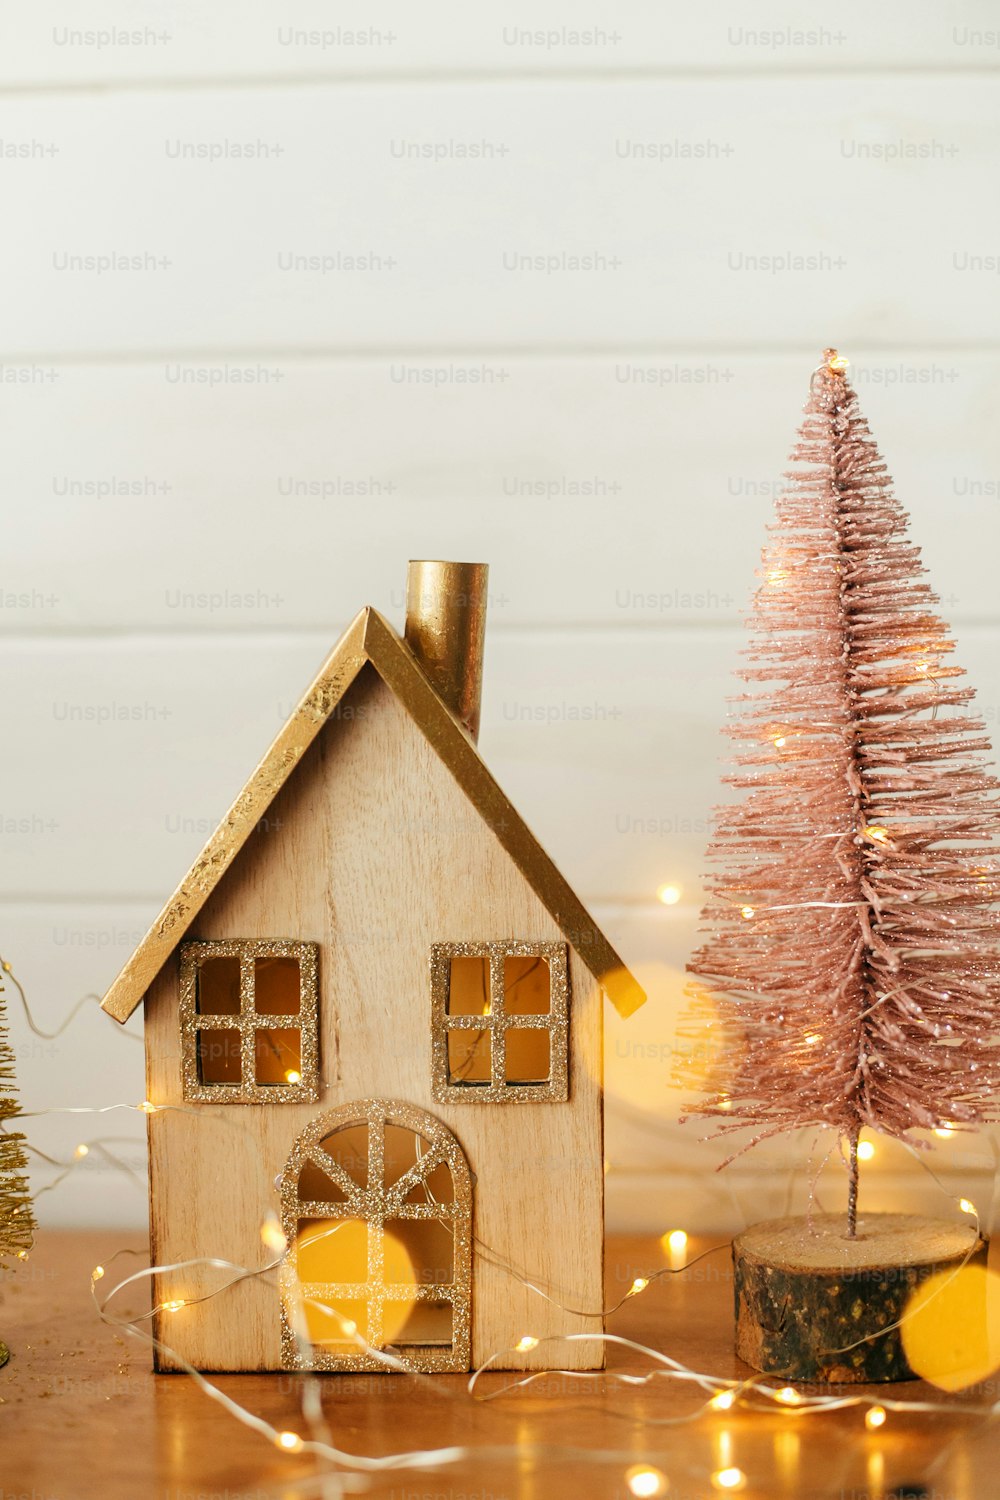 Stylish christmas house and glitter christmas tree in golden lights. Modern festive decor in scandinavian room. Miniature village with wooden house and tree toys. Merry Christmas